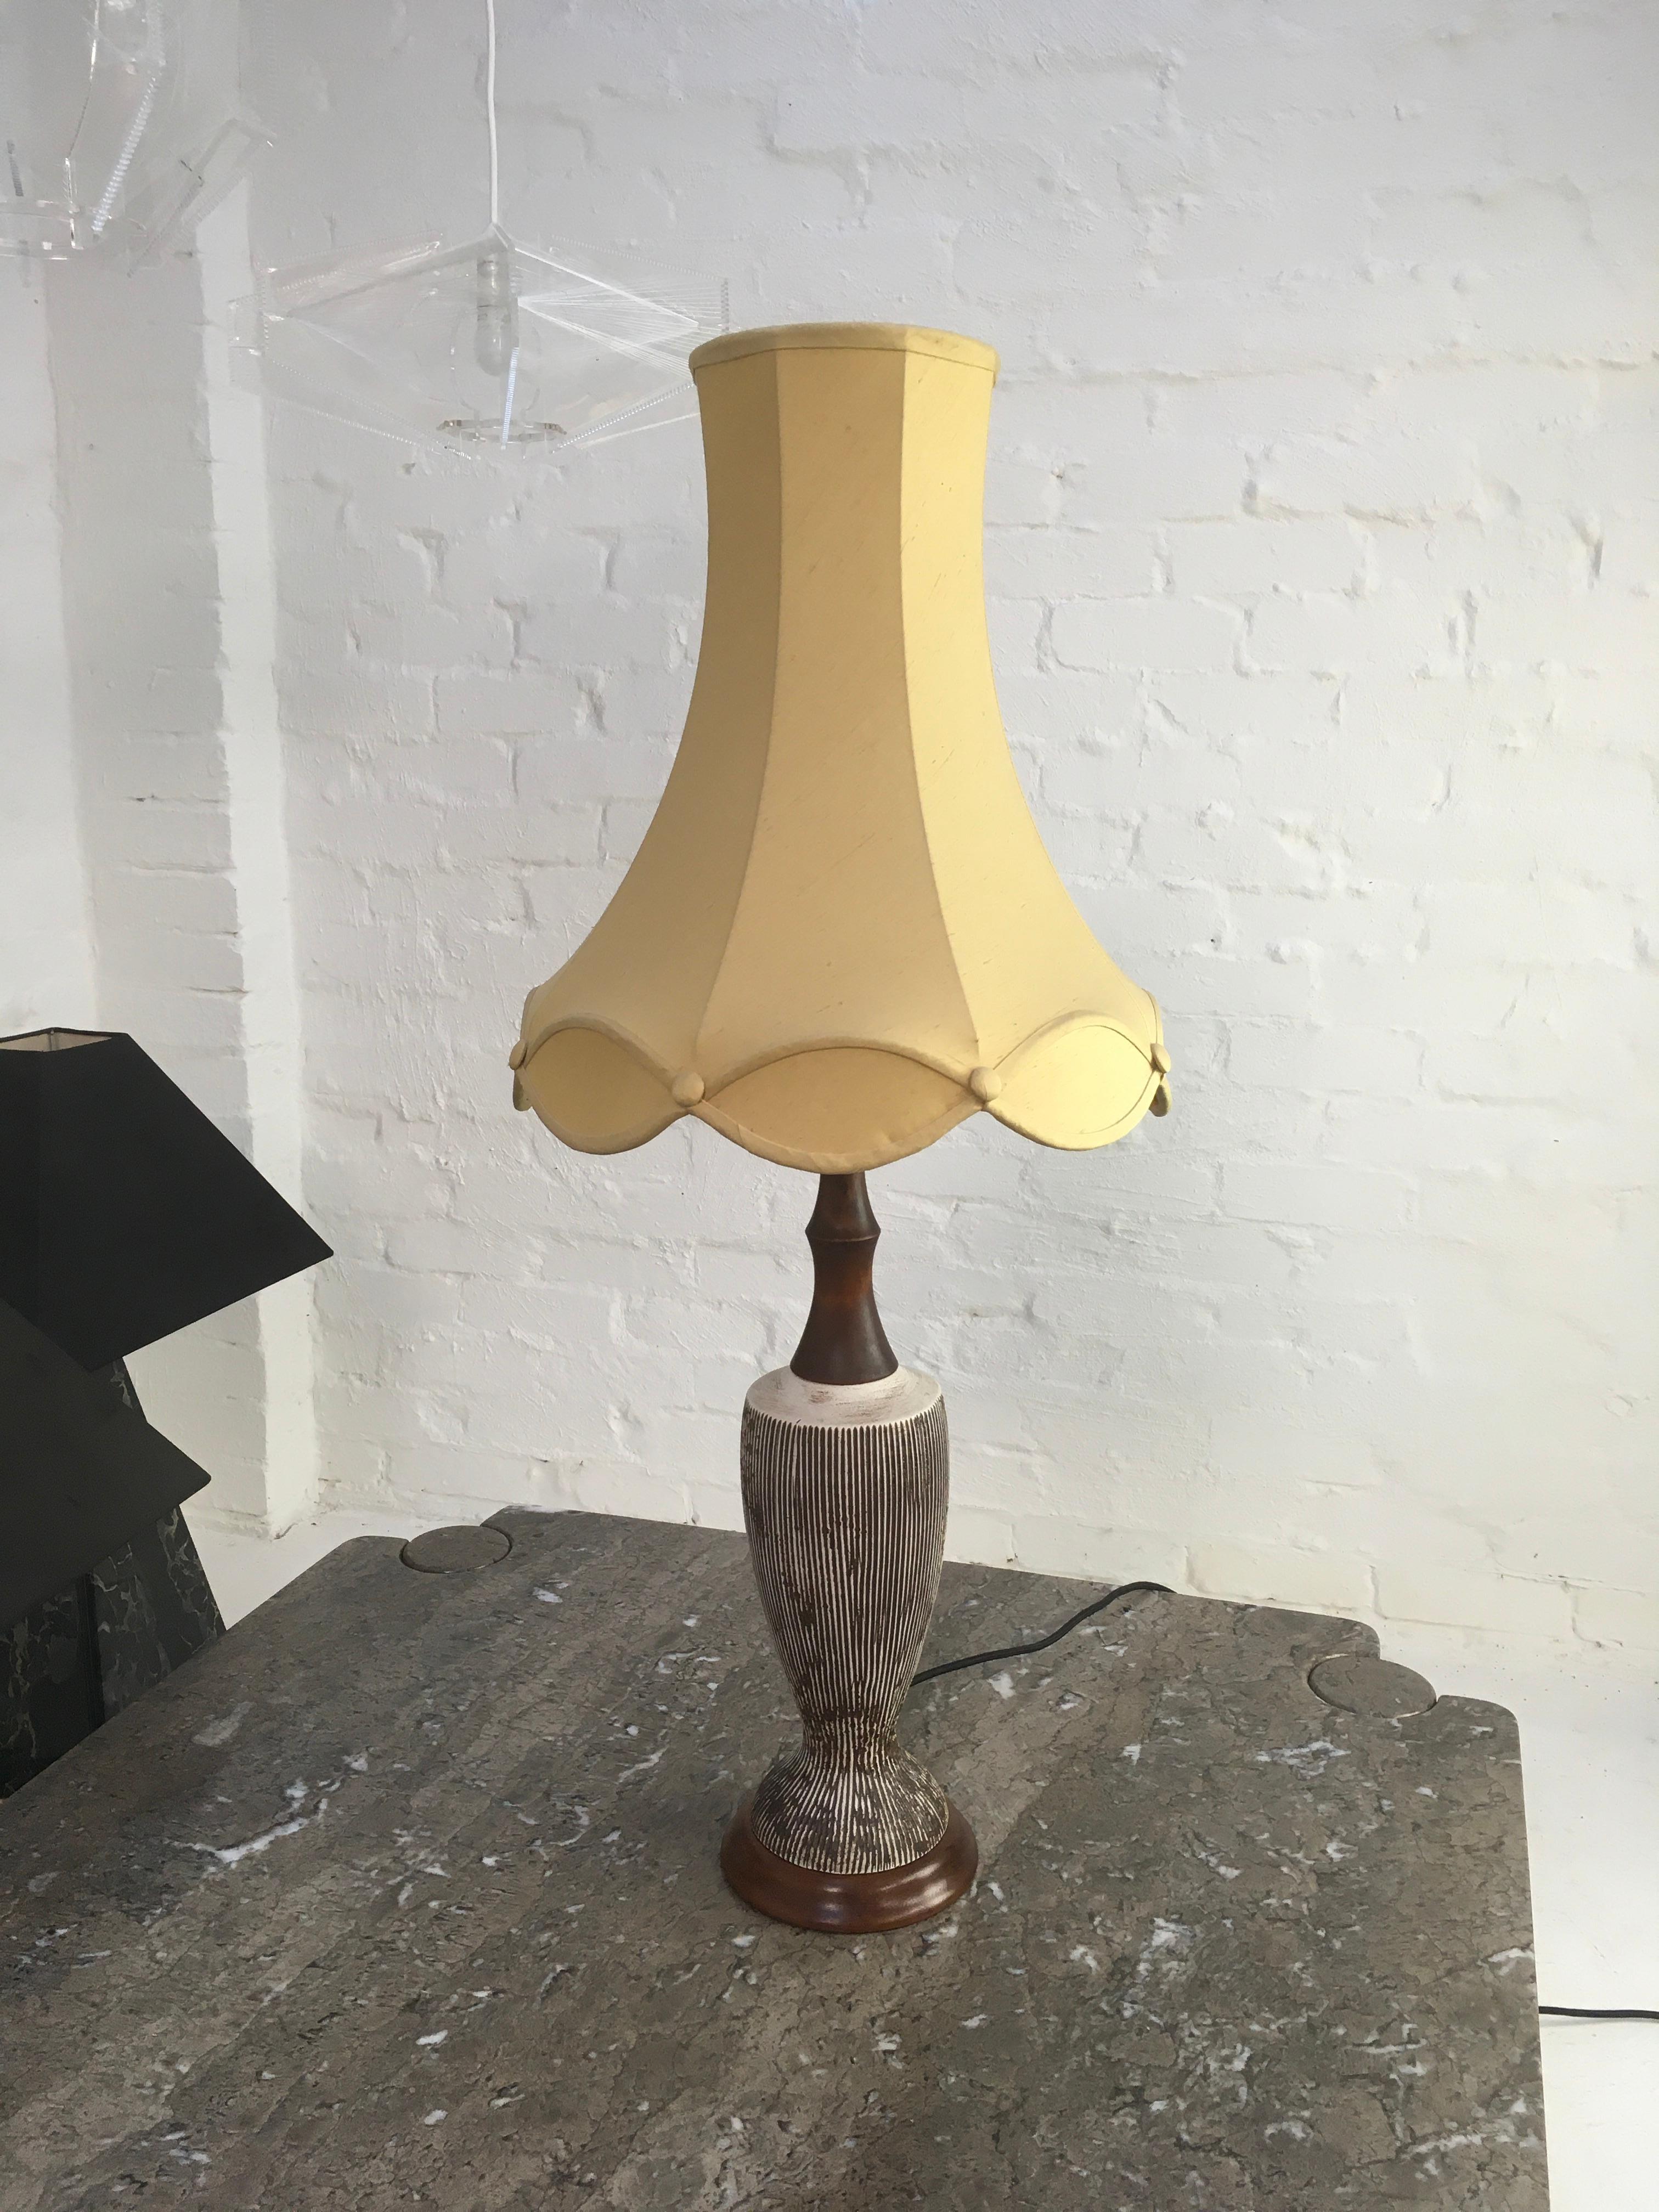 Ellis Pottery Sgraffito Ceramic and 'Walnut' Table Lamp Base Melbourne, 1950s For Sale 3